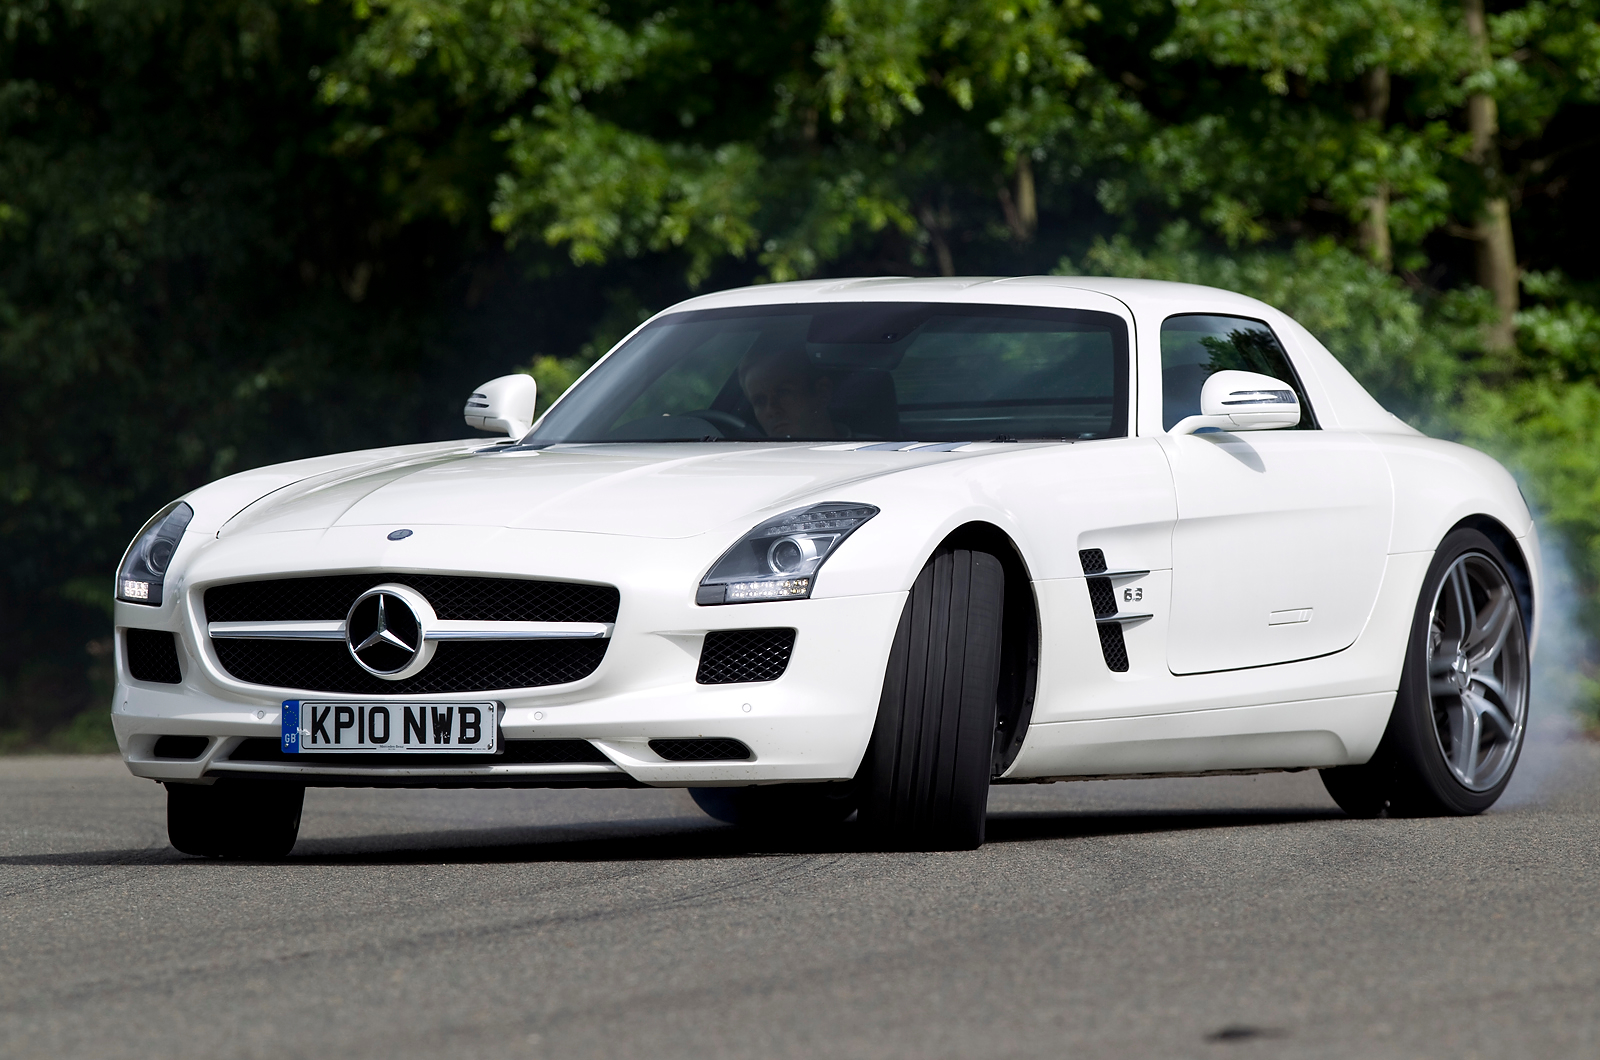 Used Mercedes-AMG SLS 2010-2015 review